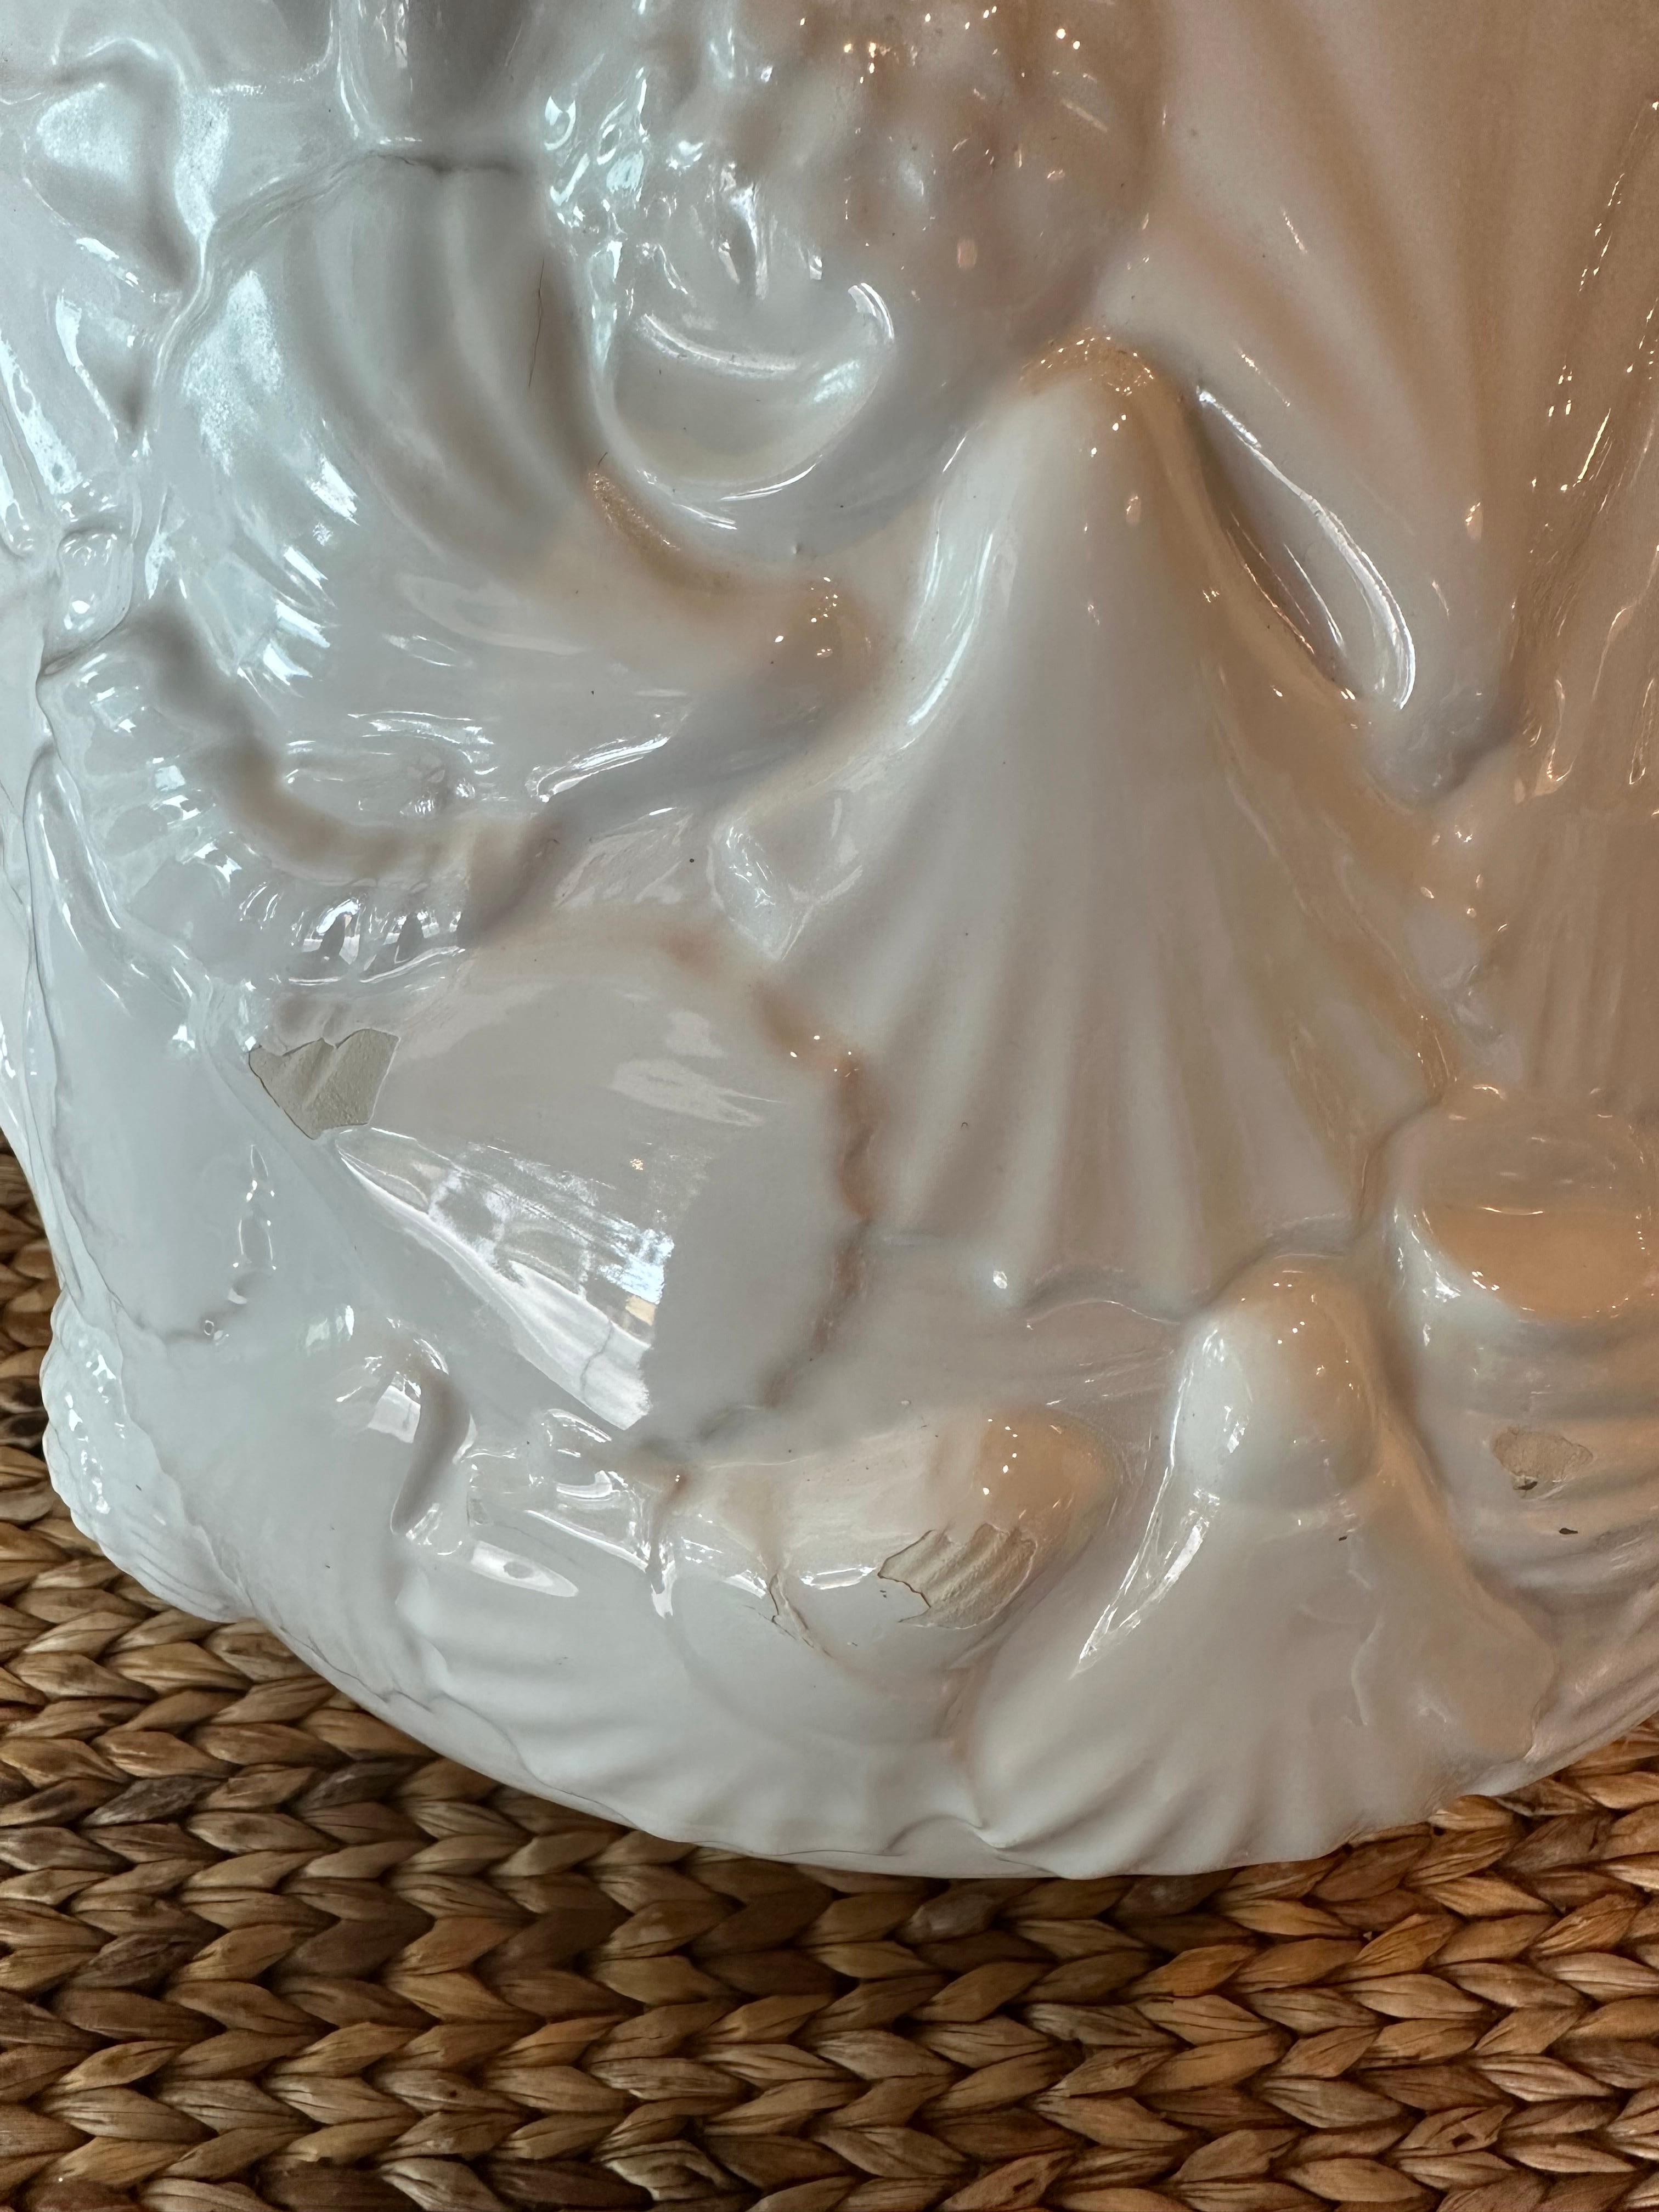 Vintage pair of white ceramic shell seashell flower pots planters. Labeled and numbered Made in Italy by Rosenthal Netter. One are that has the ceramic glaze chipped in 3 spots (tiny). Please see picture. Dimensions: 11.5 H x 13 D. 